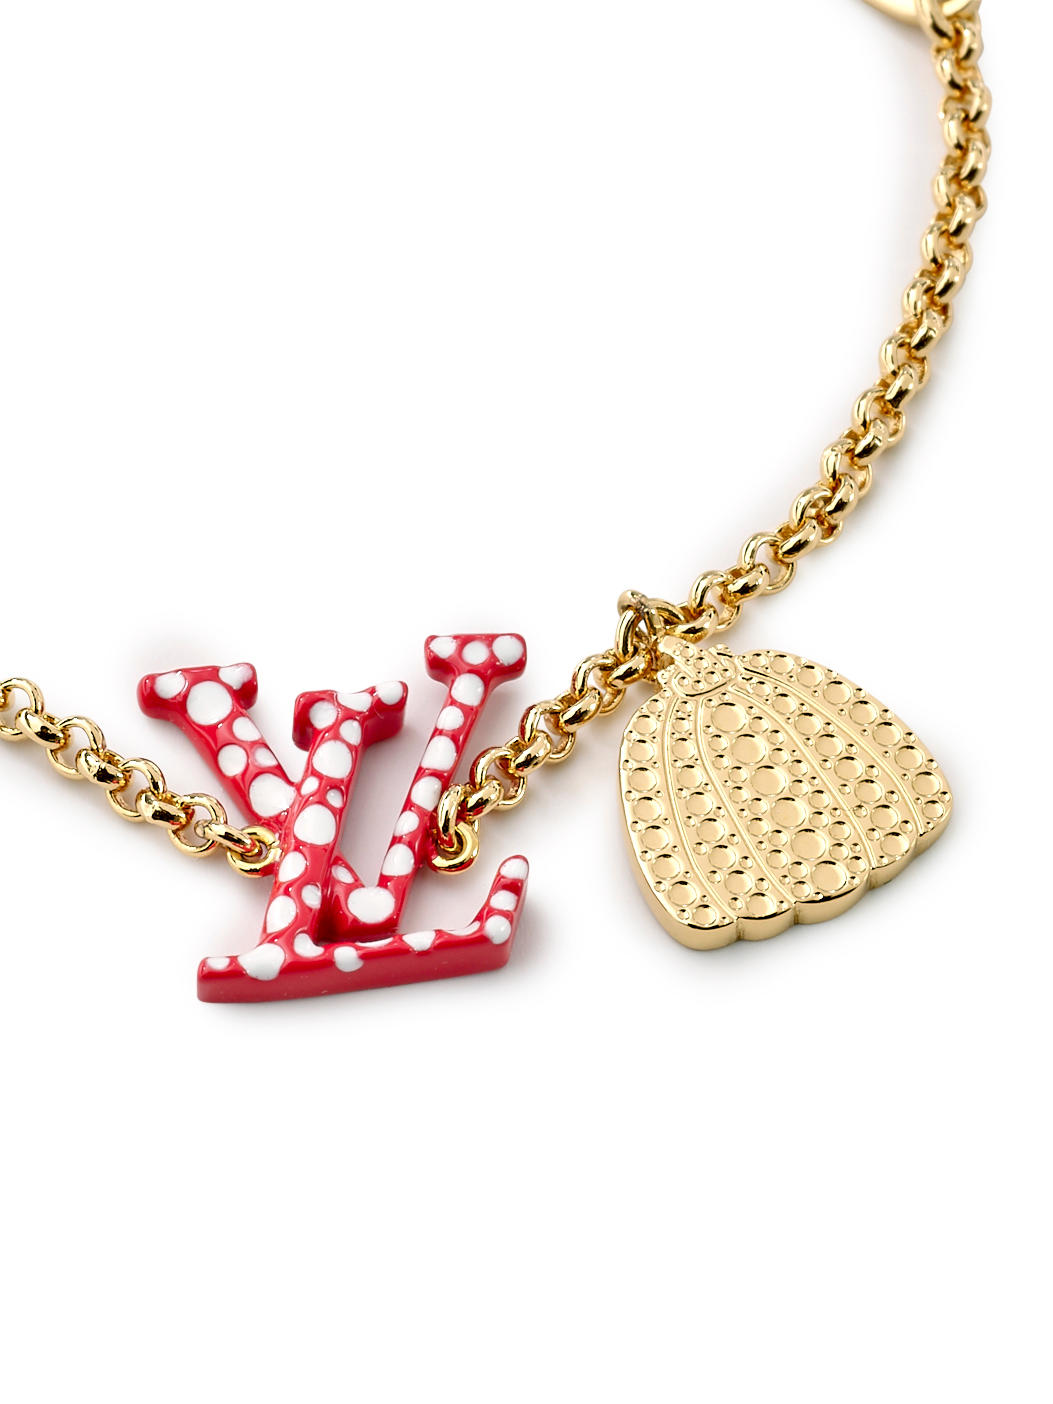 Louis Vuitton x Yayoi Kusama Monogram Chain Necklace Black in Metal with  Silver-tone - US